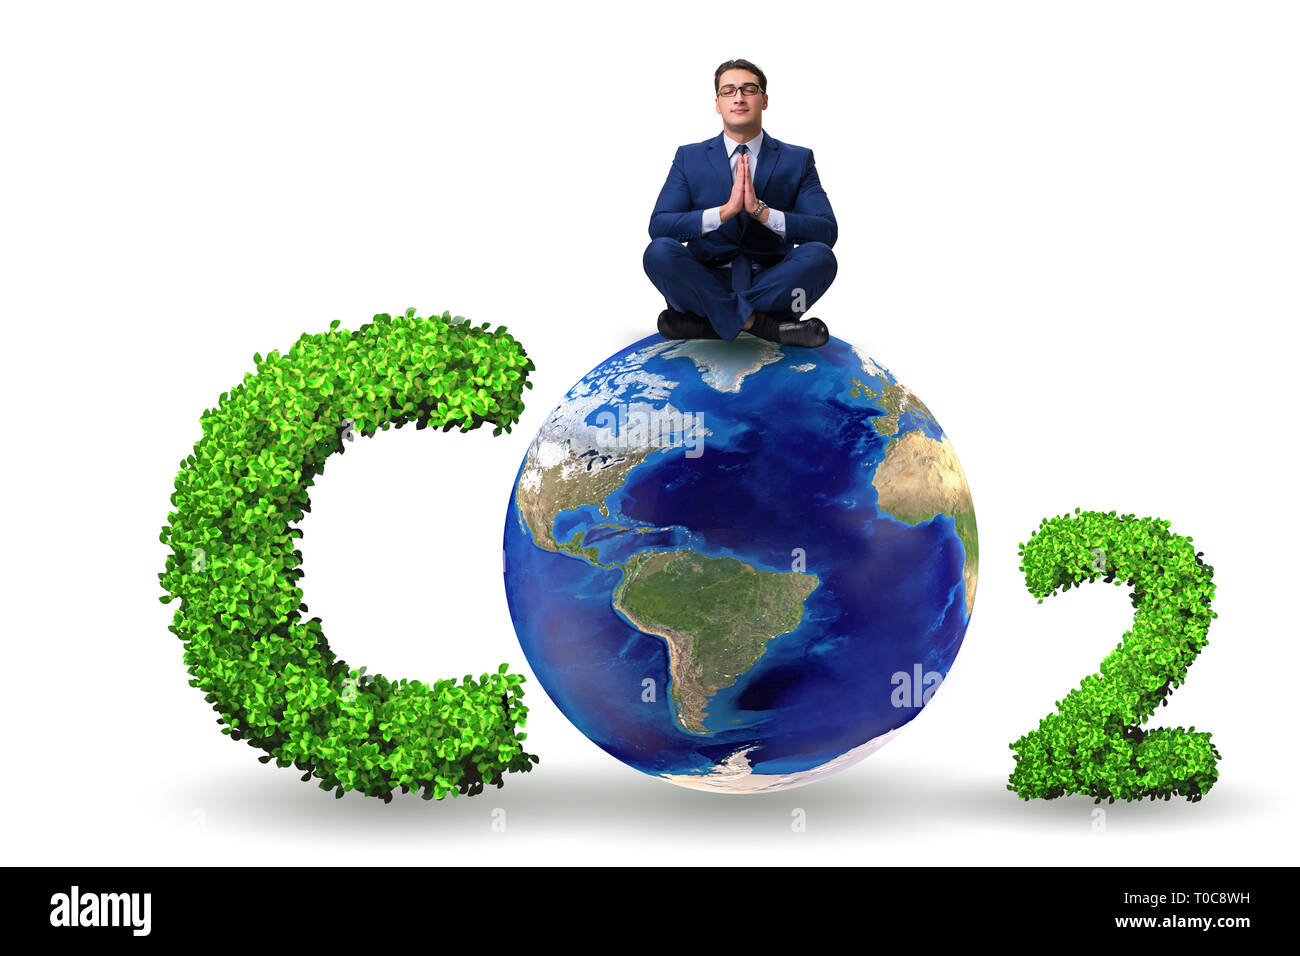 Ecological concept of greenhouse gas emissions Stock Photo